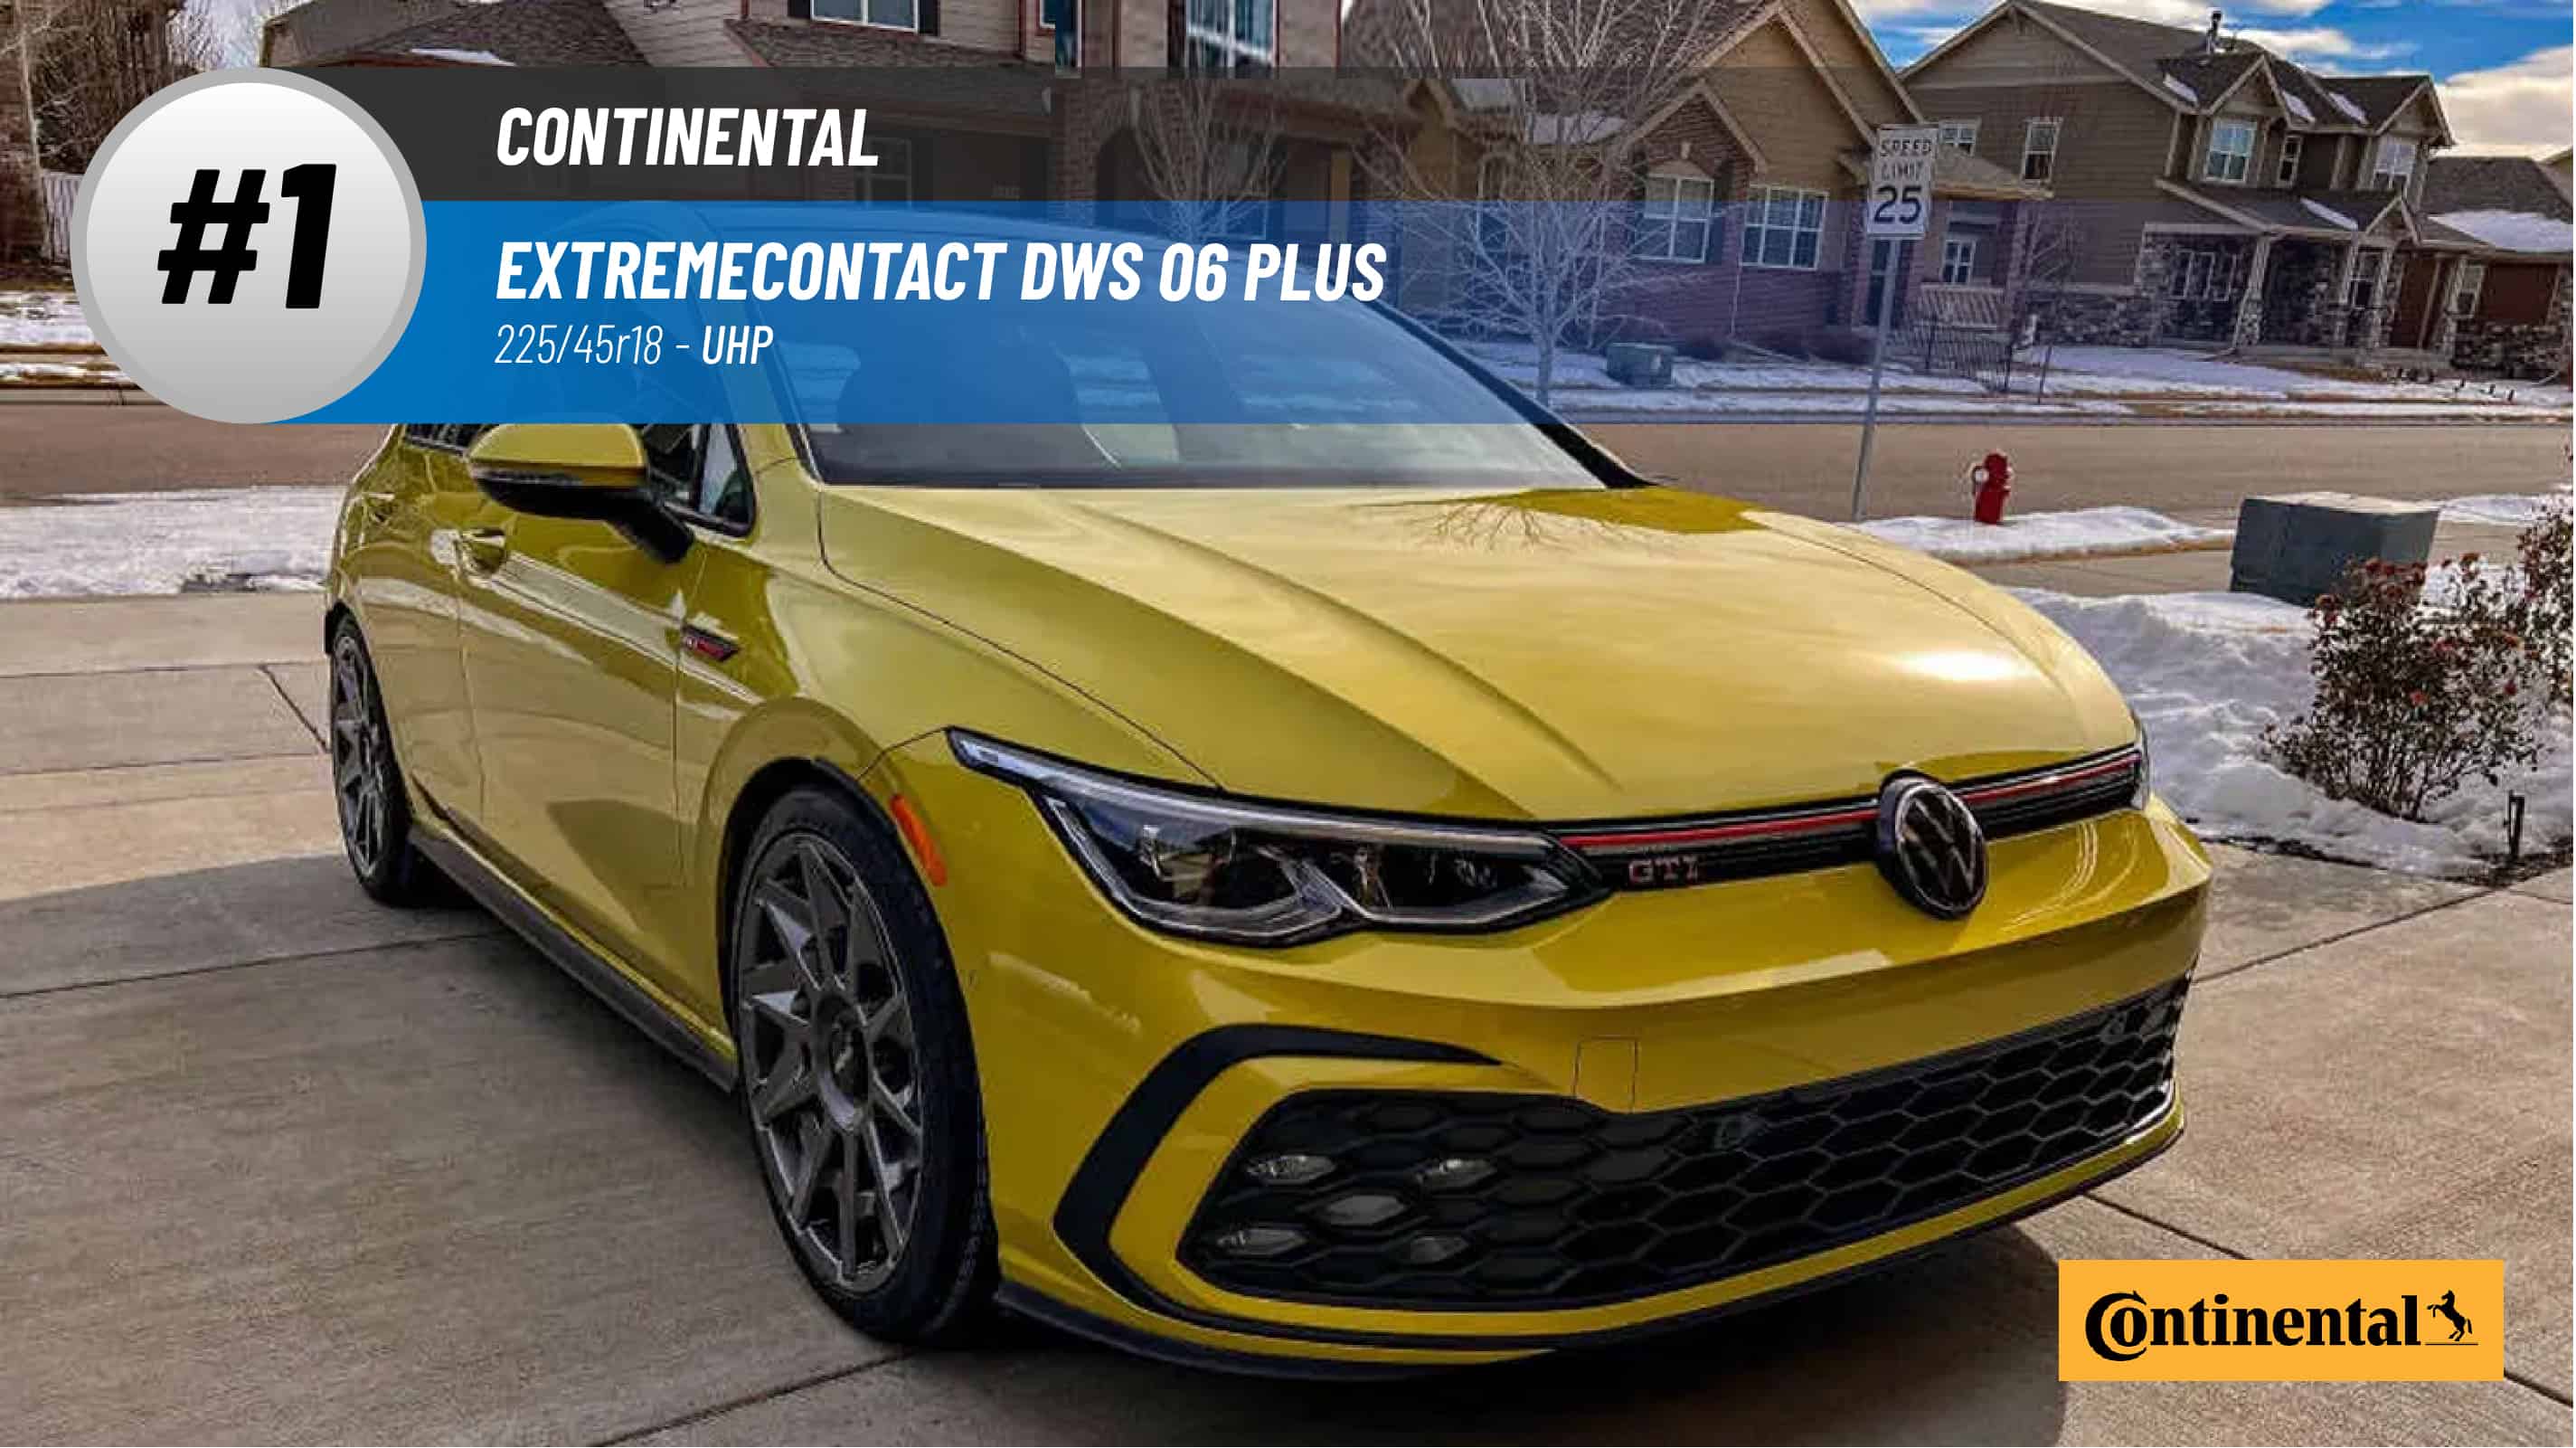 Top #1 UHP Tires: Continental ExtremeContact DWS 06 Plus – best 225/45r18